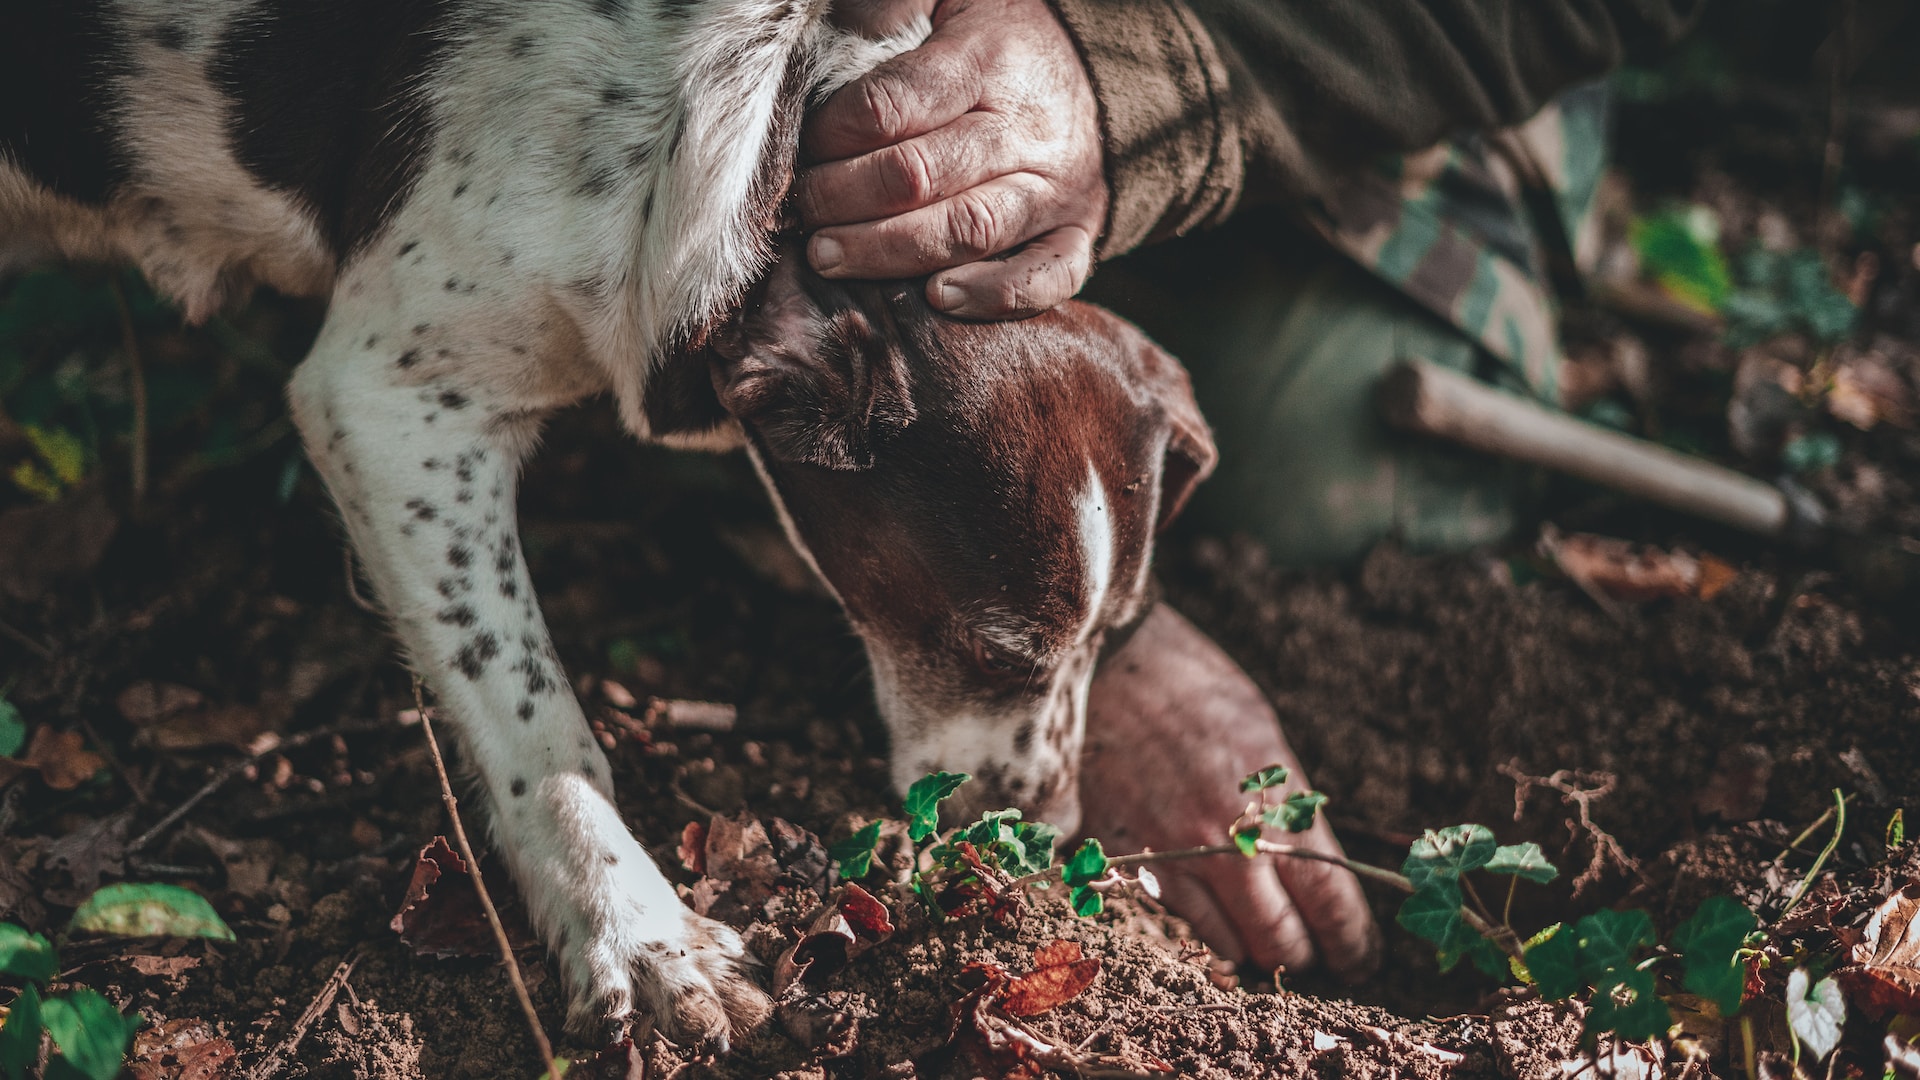 close-up photo of a truffle hunting dog, working with its owner to sniff out truffles